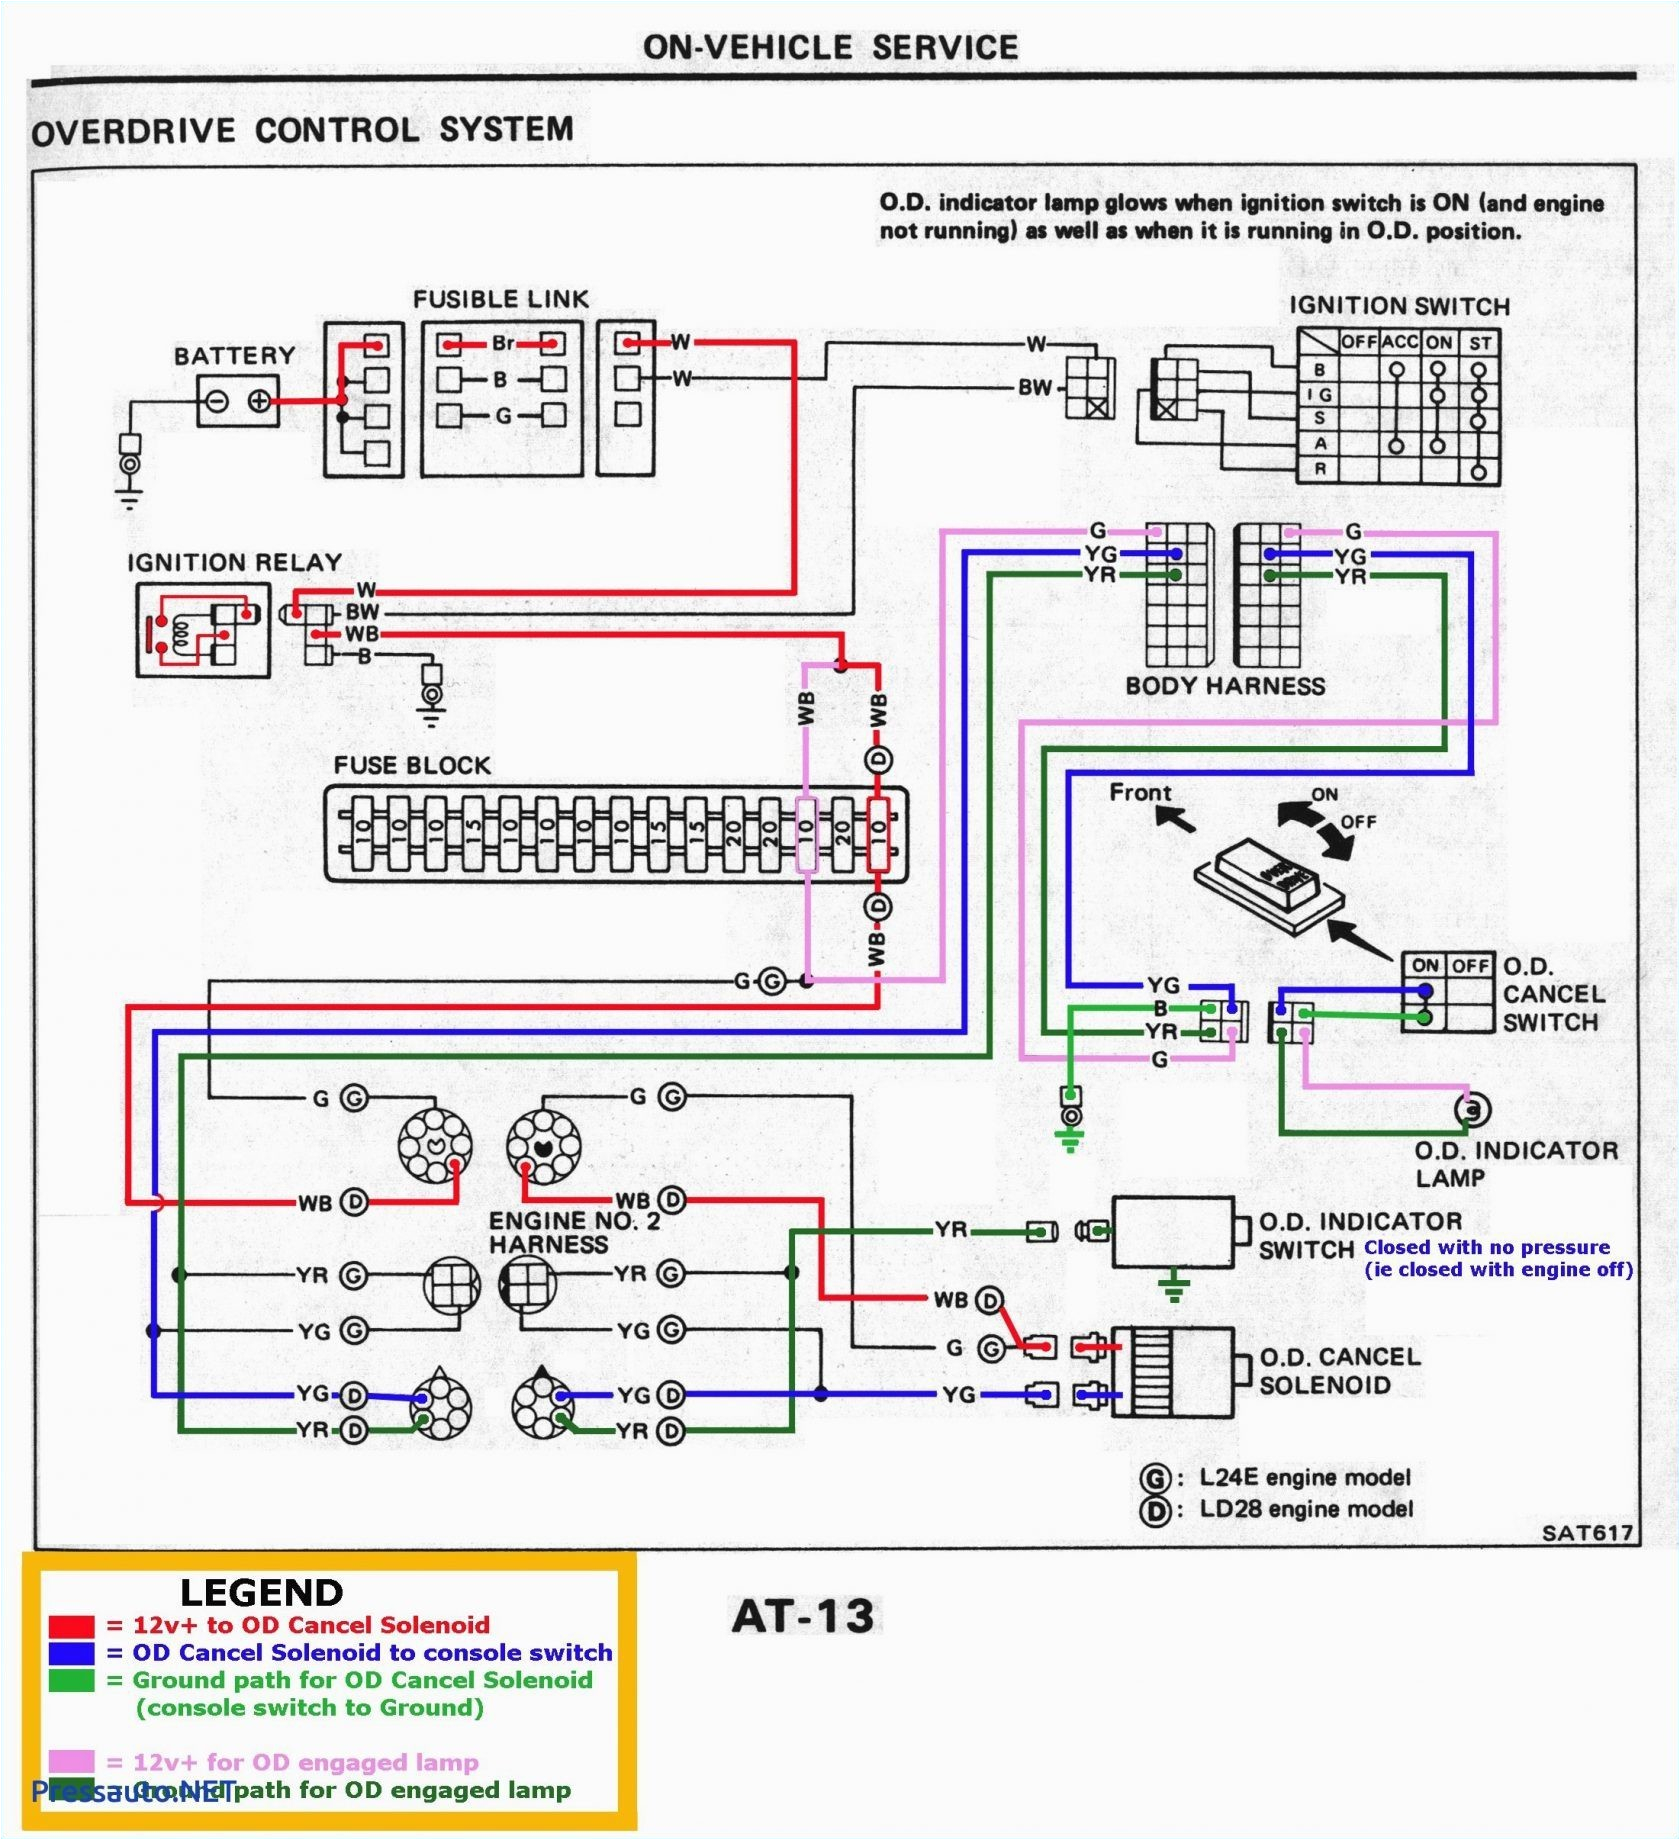 bose link cable wiring diagram data wiring diagram bose link cable wiring diagram